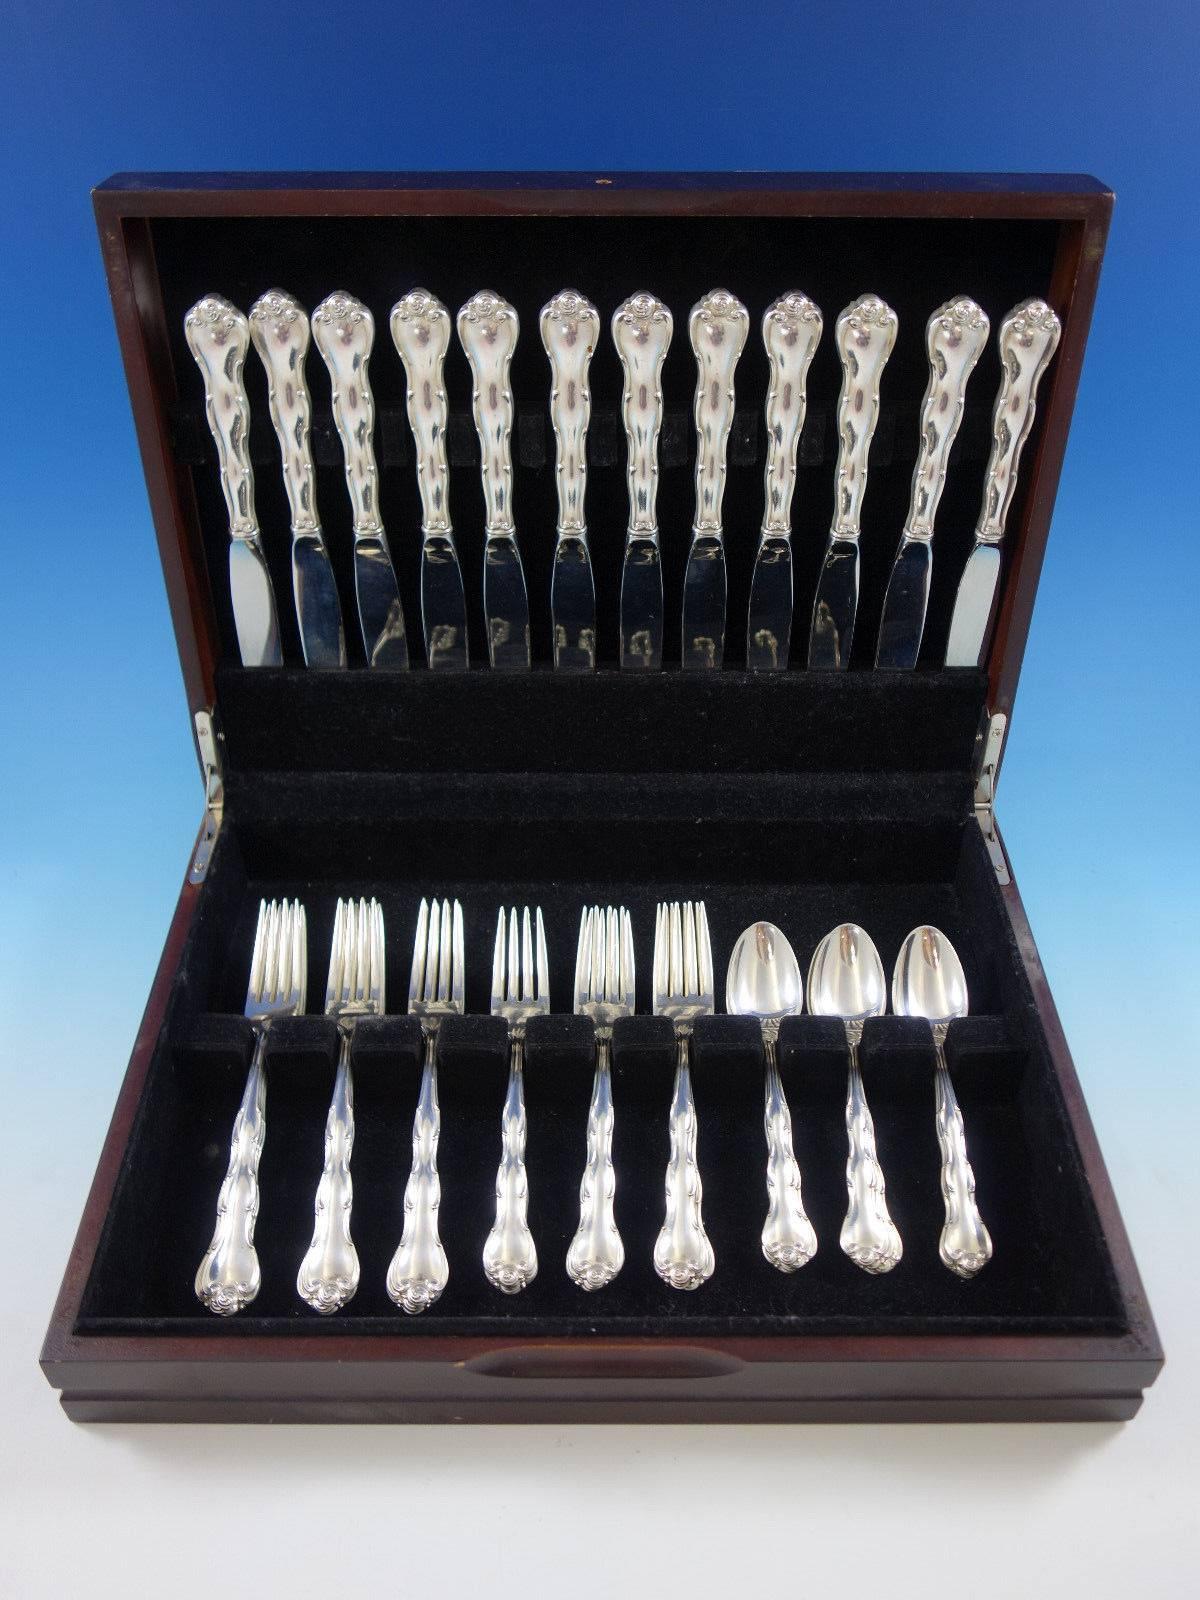 Rondo by Gorham sterling silver flatware set, 48 Pieces. This set includes: 

12 knives, 8 7/8